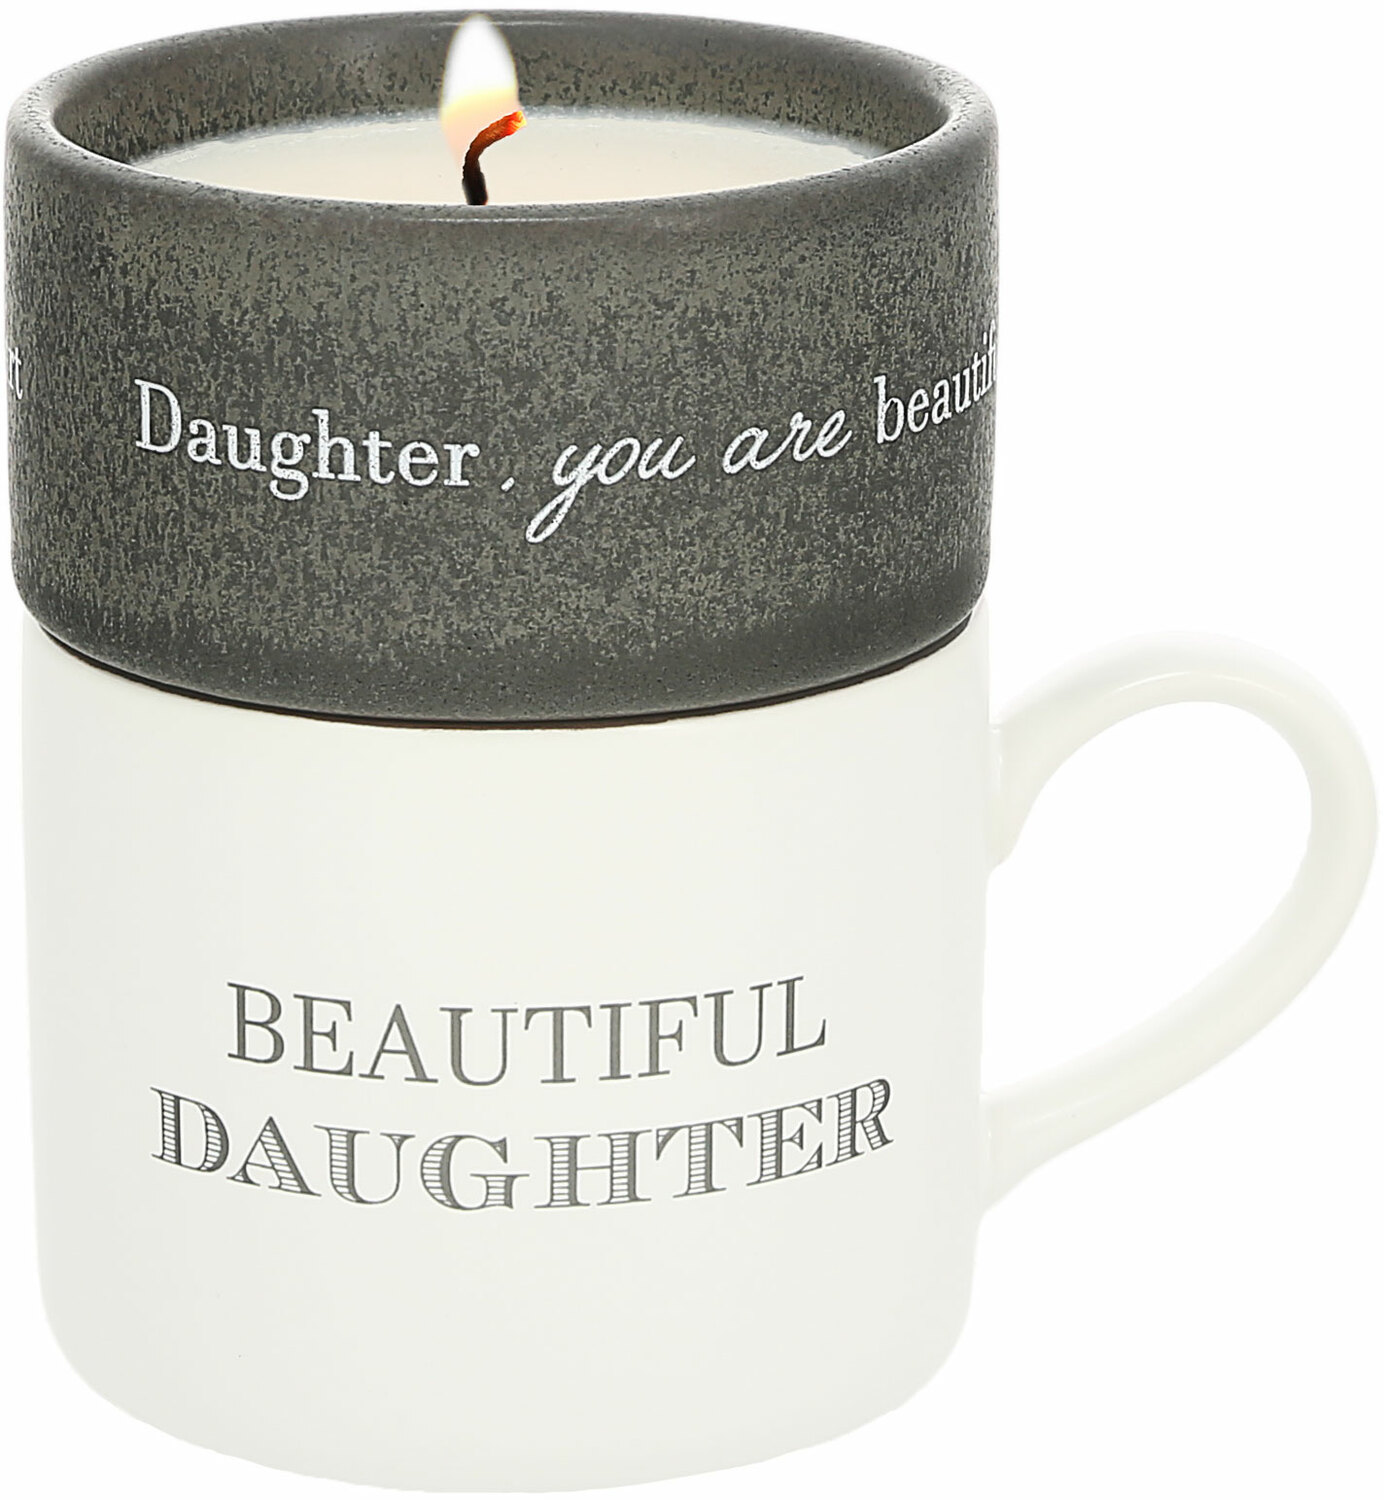 Daughter by Filled with Warmth - Daughter - Stacking Mug and Candle Set
100% Soy Wax Scent: Tranquility